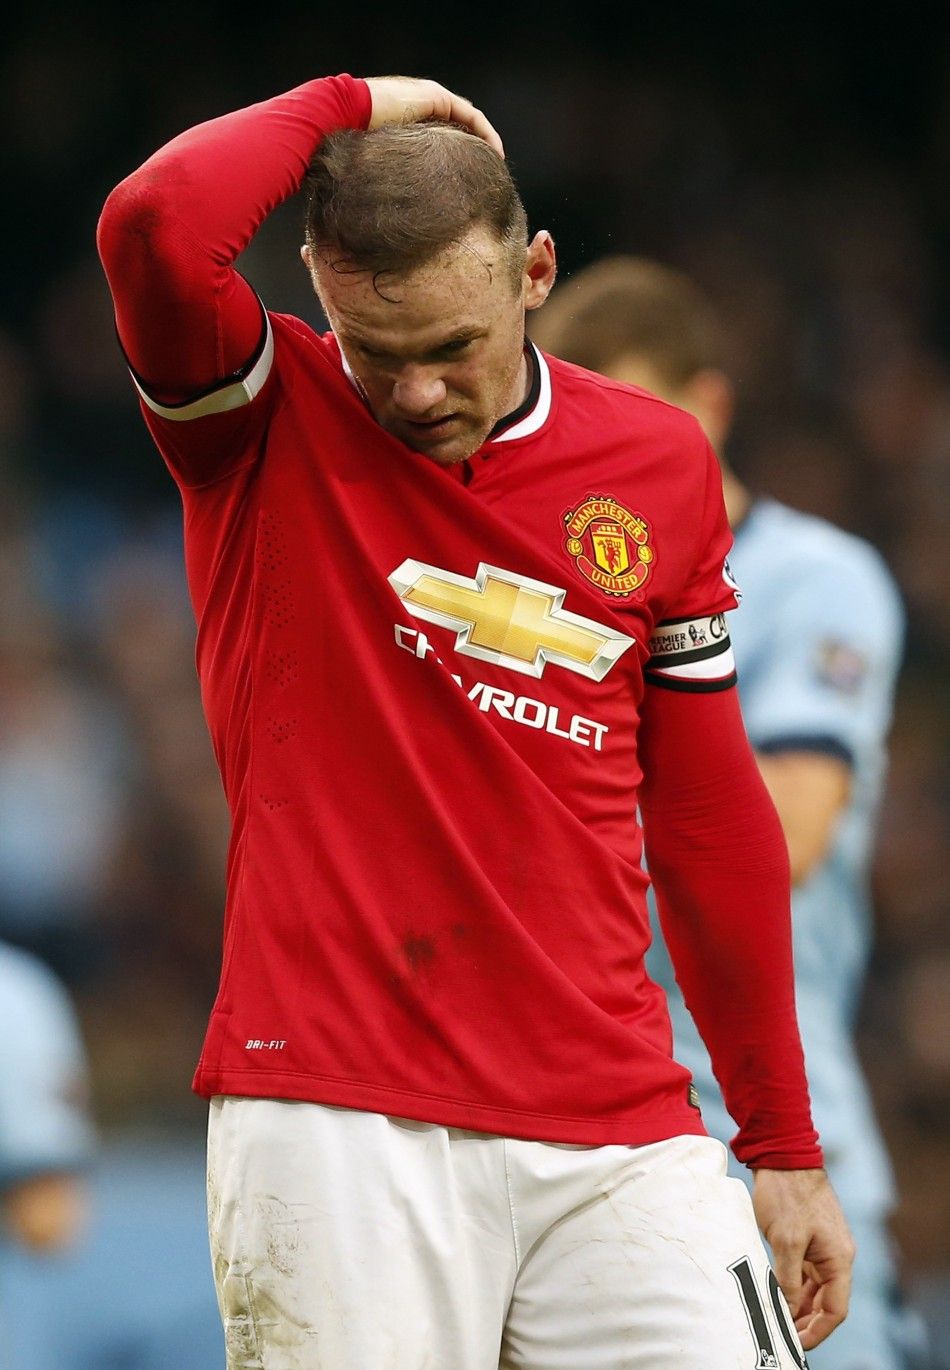 Manchester Uniteds Wayne Rooney reacts during their English Premier League soccer match against Manchester City at the Etihad Stadium in Manchester, northern England November 2, 2014. 